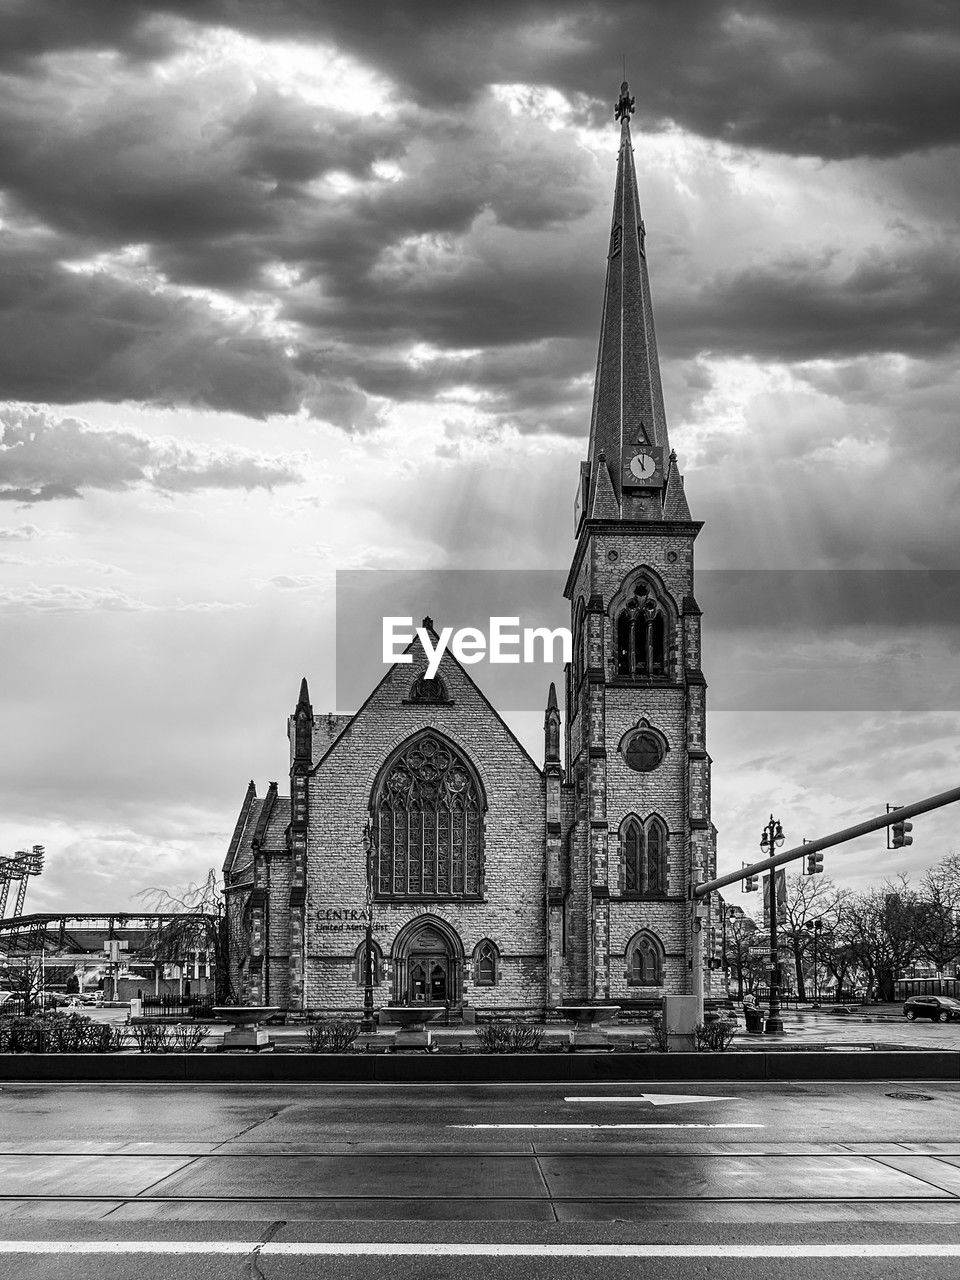 architecture, built structure, building exterior, cloud, black and white, place of worship, religion, sky, building, belief, monochrome, tower, monochrome photography, travel destinations, spirituality, landmark, nature, worship, city, history, the past, cityscape, spire, catholicism, steeple, travel, no people, outdoors, tourism, white, black, clock tower, street, day